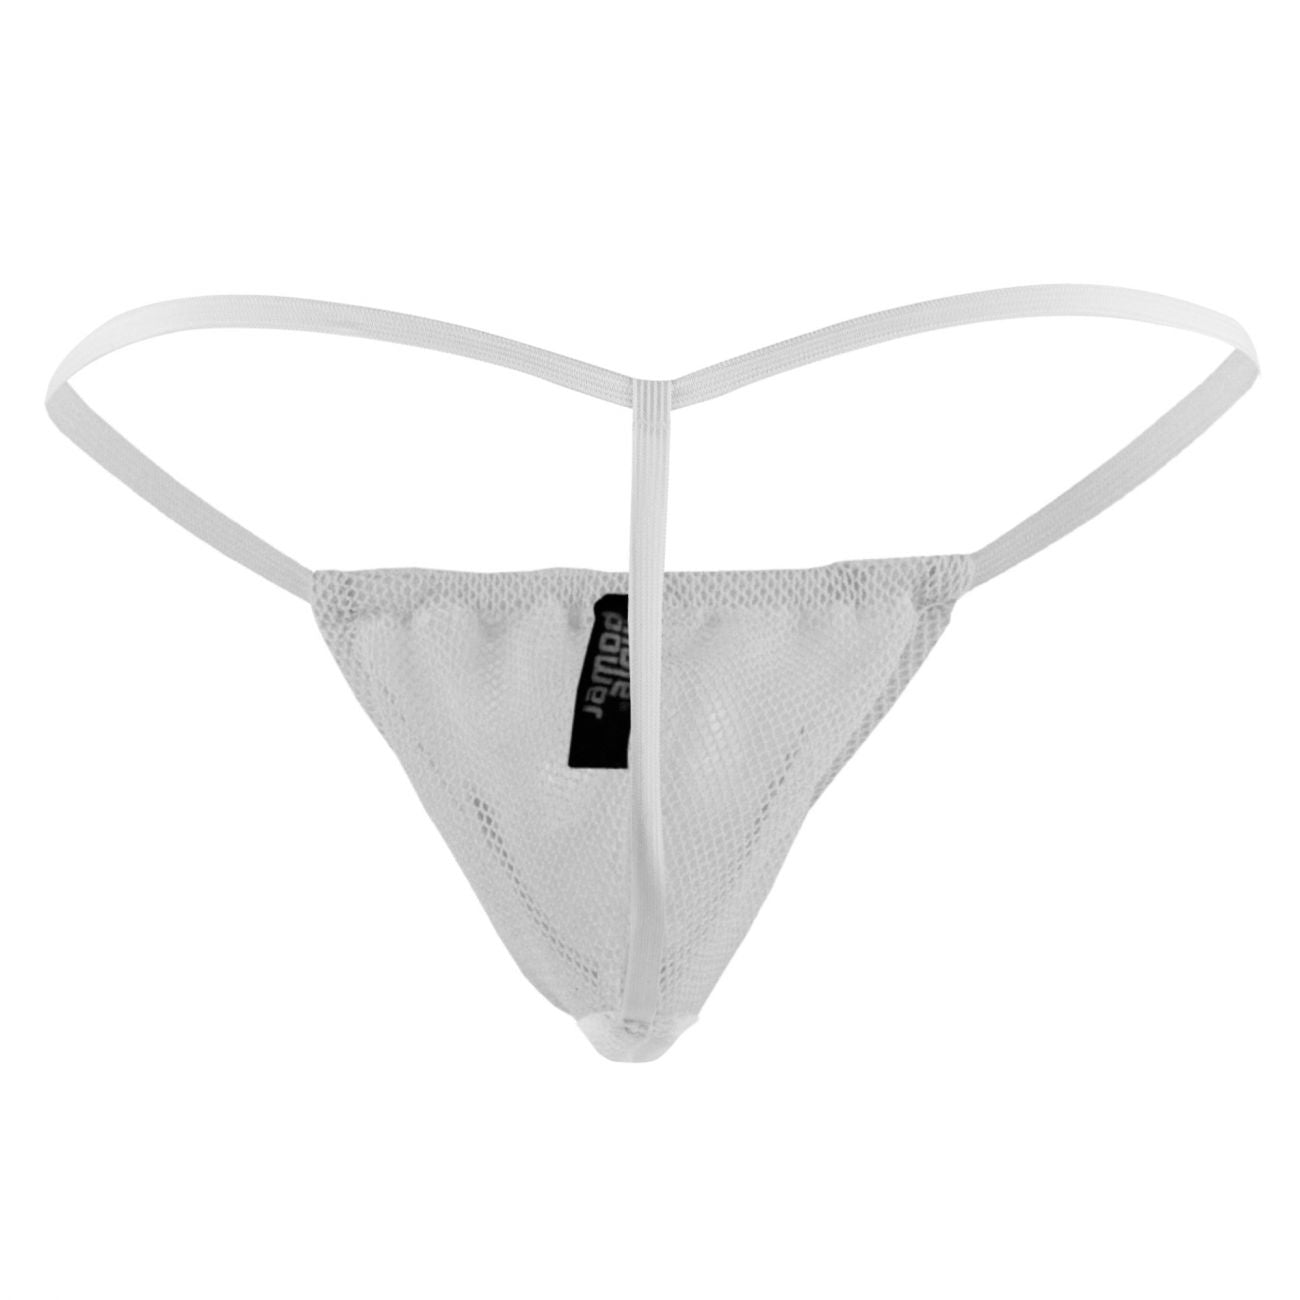 Male Power 45011C Stretch Net Posing Strap Thong Color White